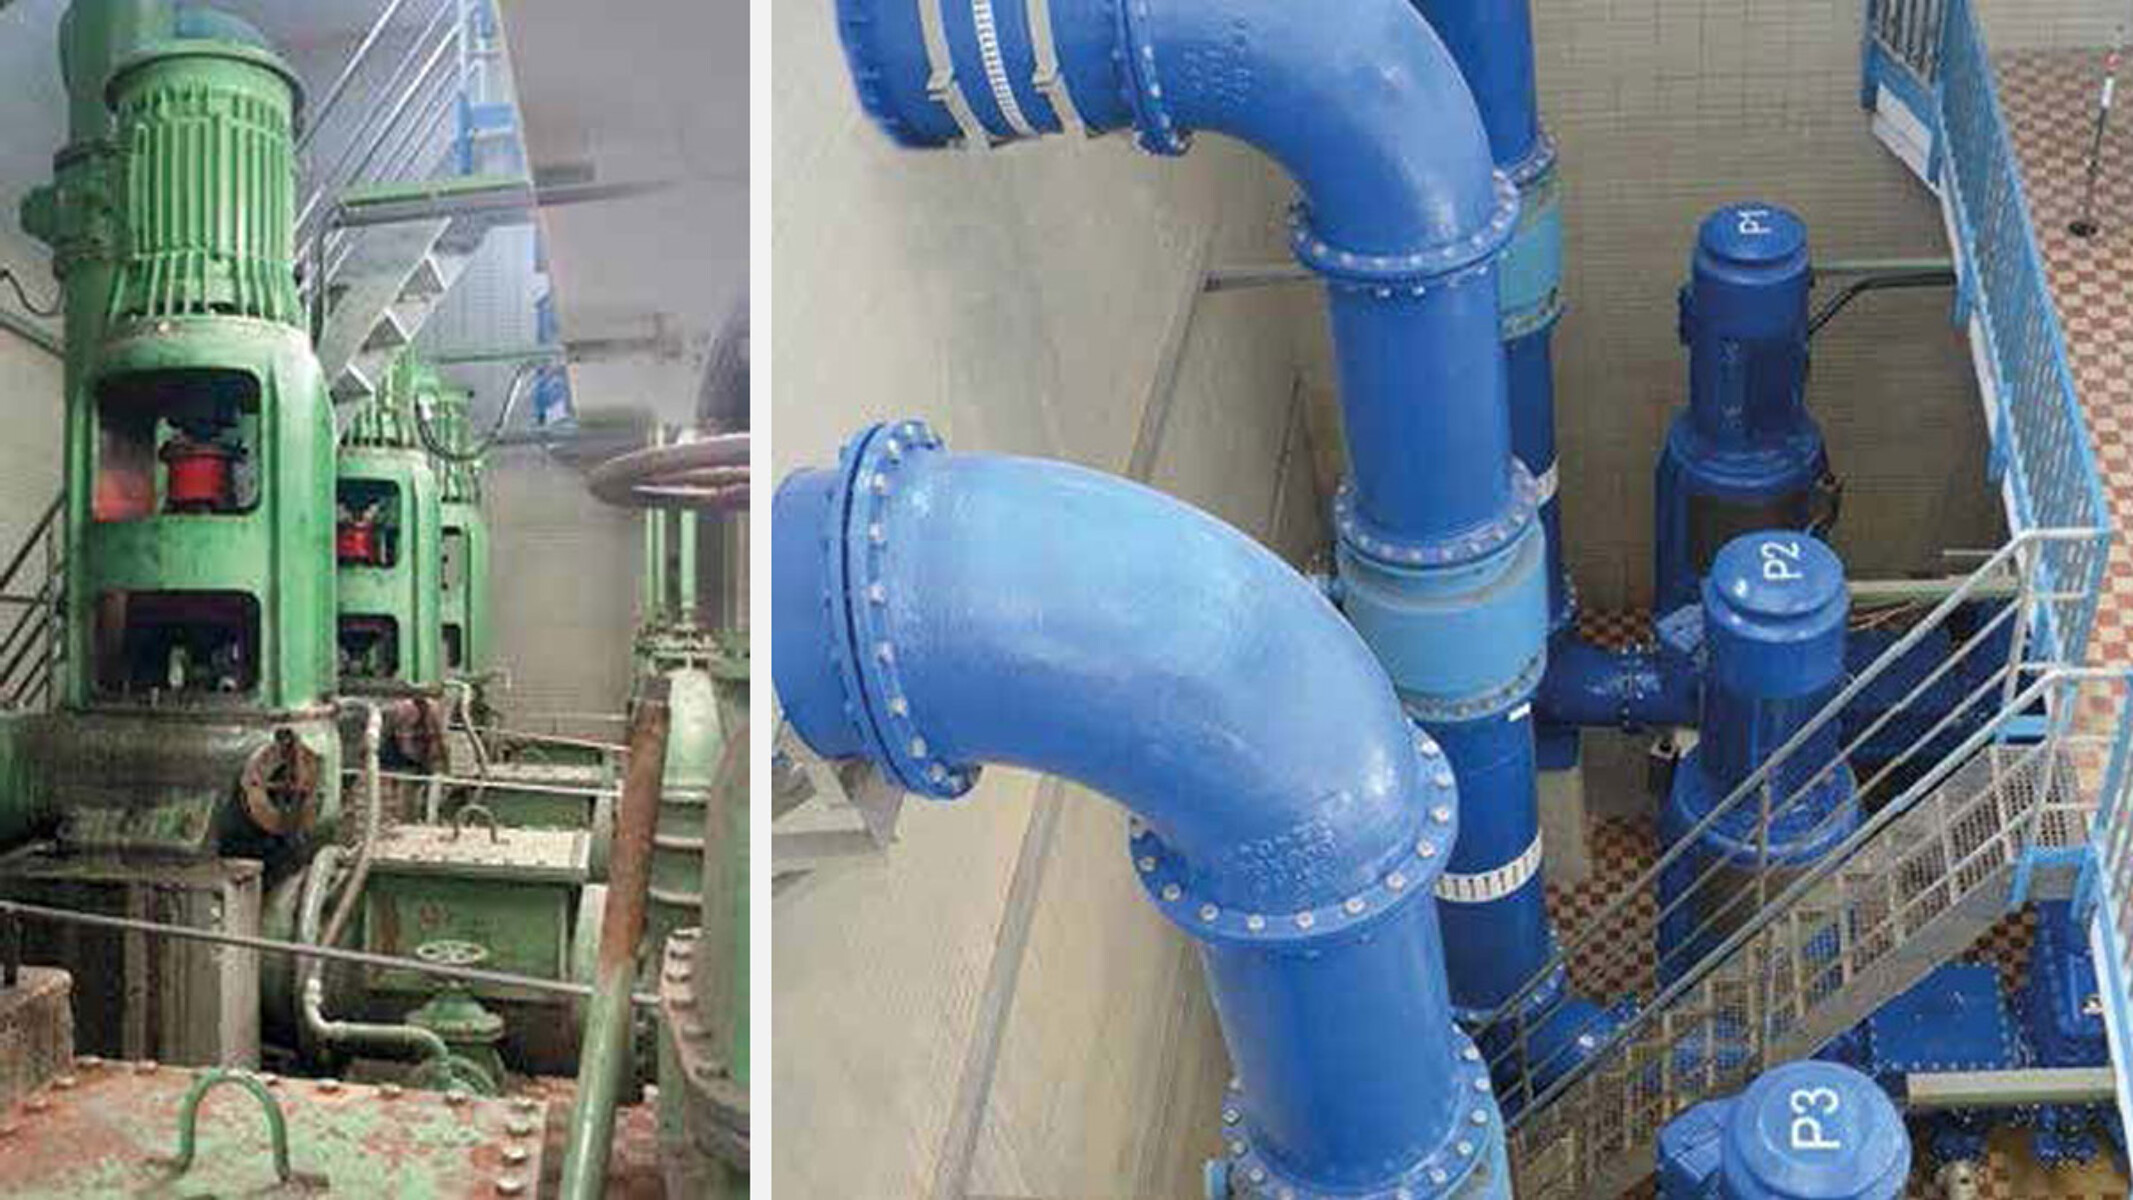 Condition of the pumping station before work started (left) and the completed system (right)